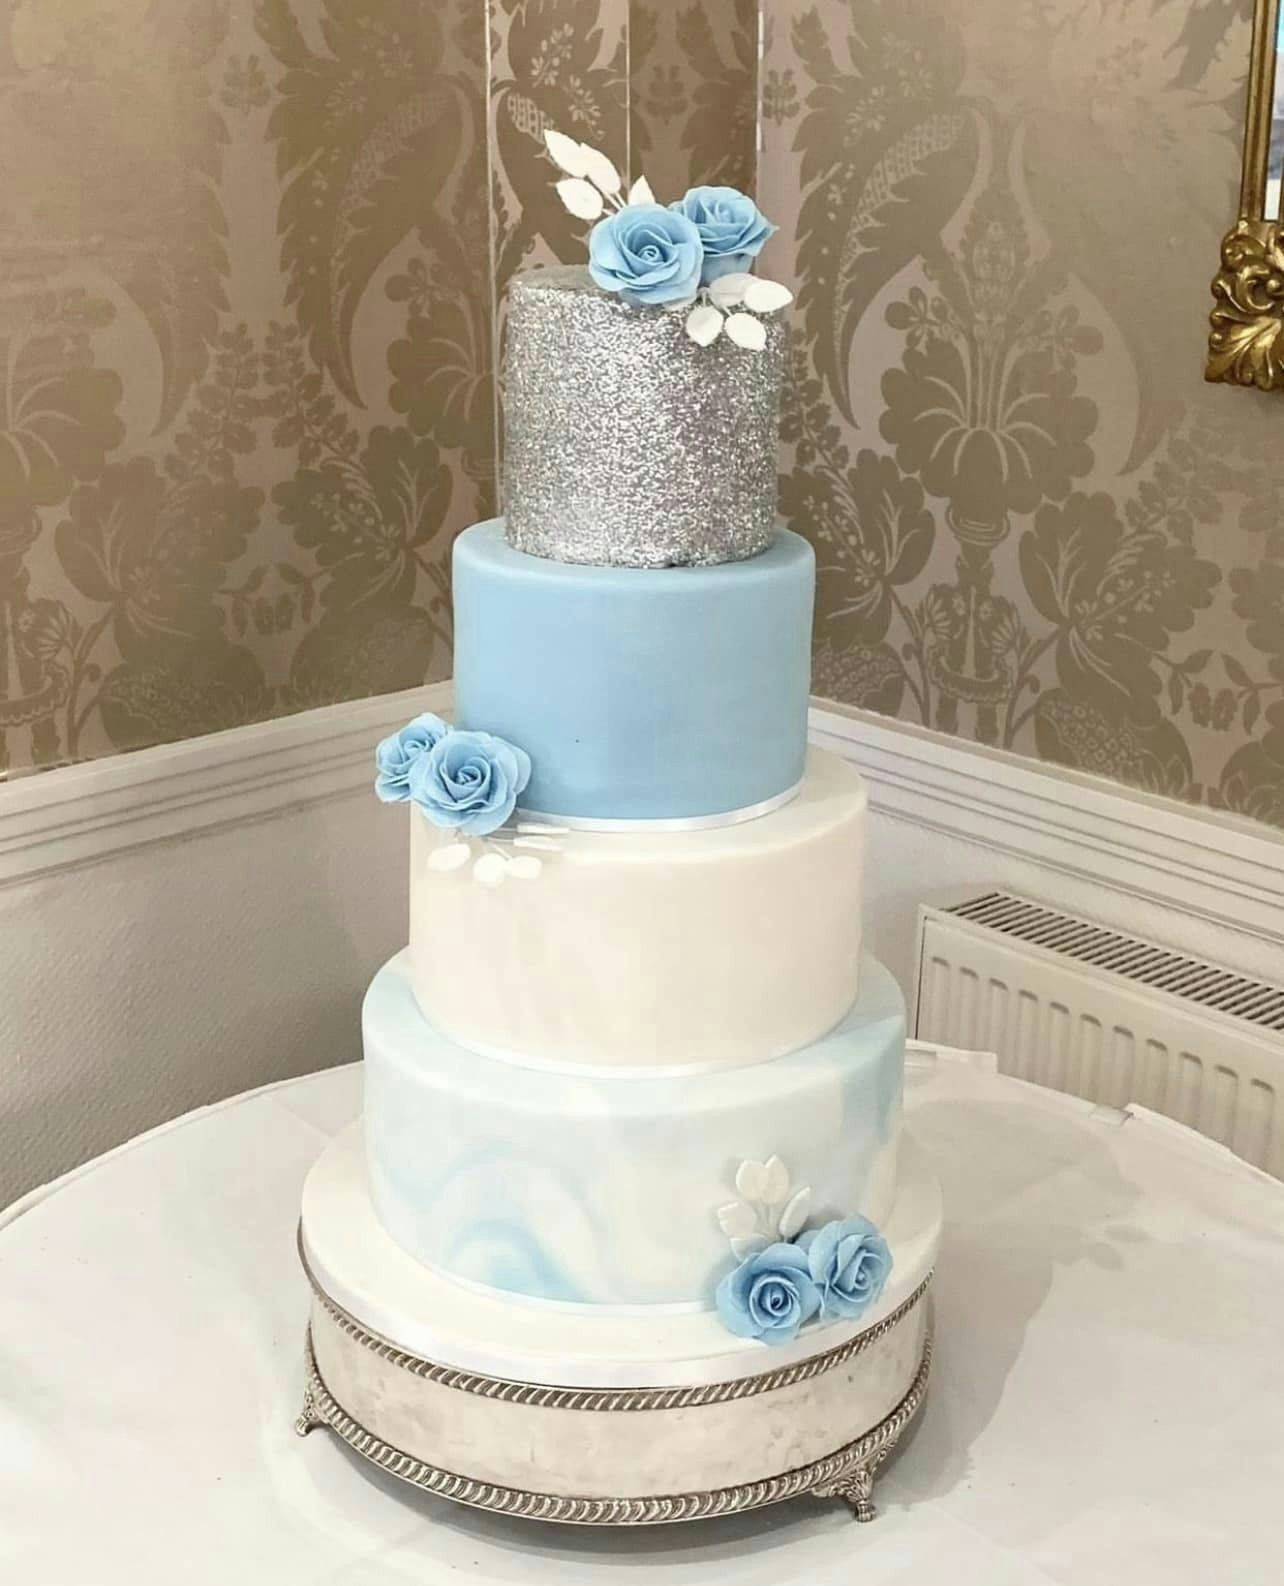 Wedding cake with silver, blue, white and marble layers